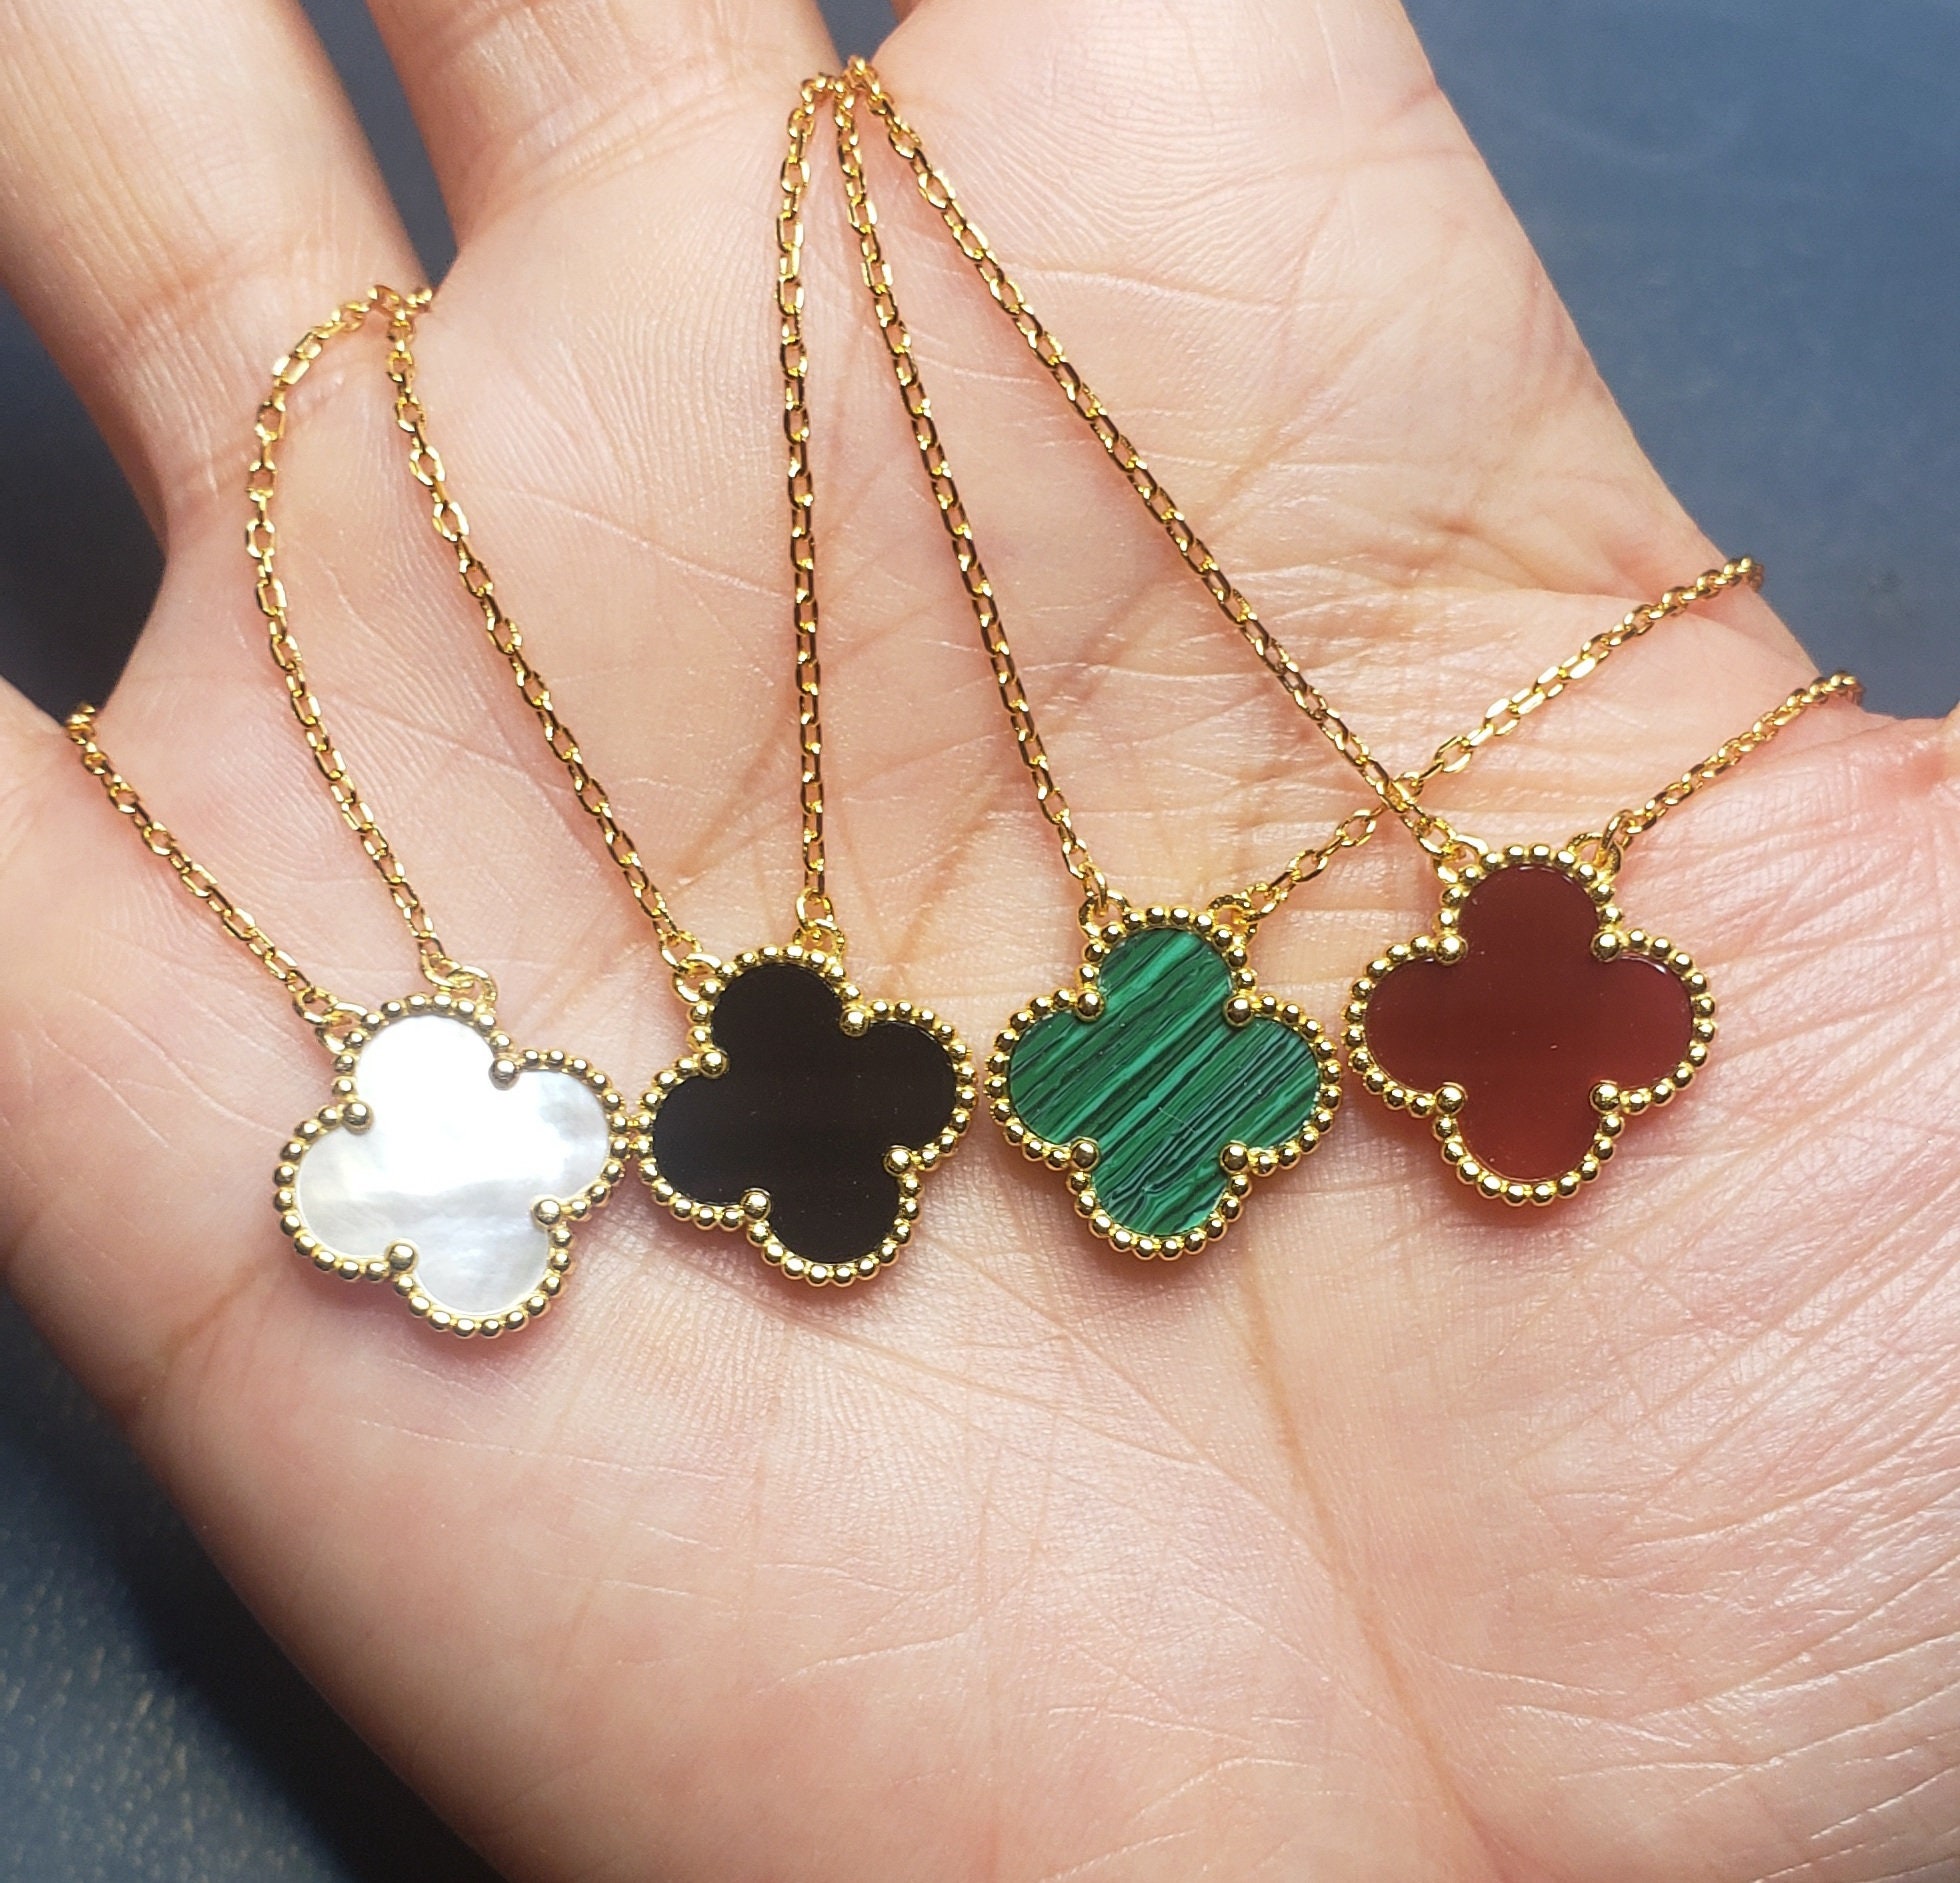 15mm clover necklace in various colors. 18k gold plated Etsy